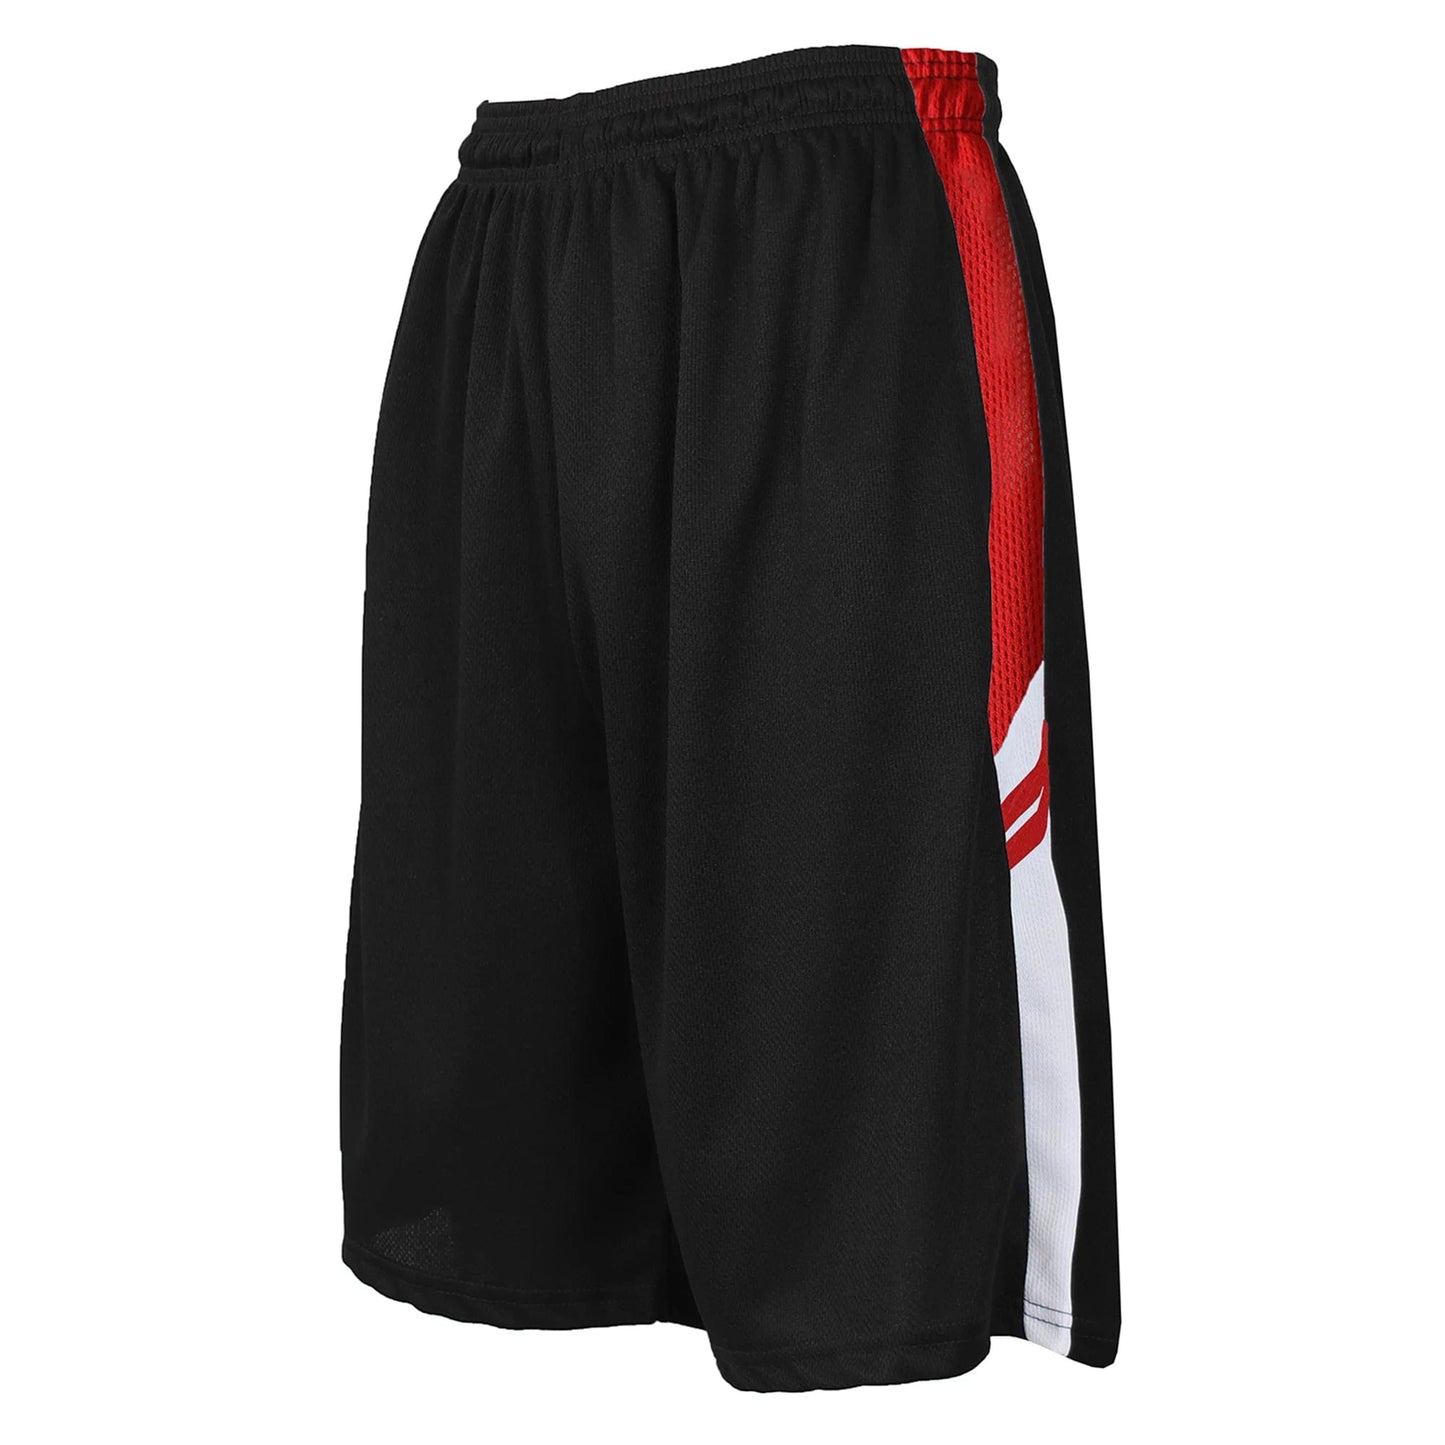 Men's Moisture-Wicking Lightweight Breathable Active Mesh Shorts (S-2XL)